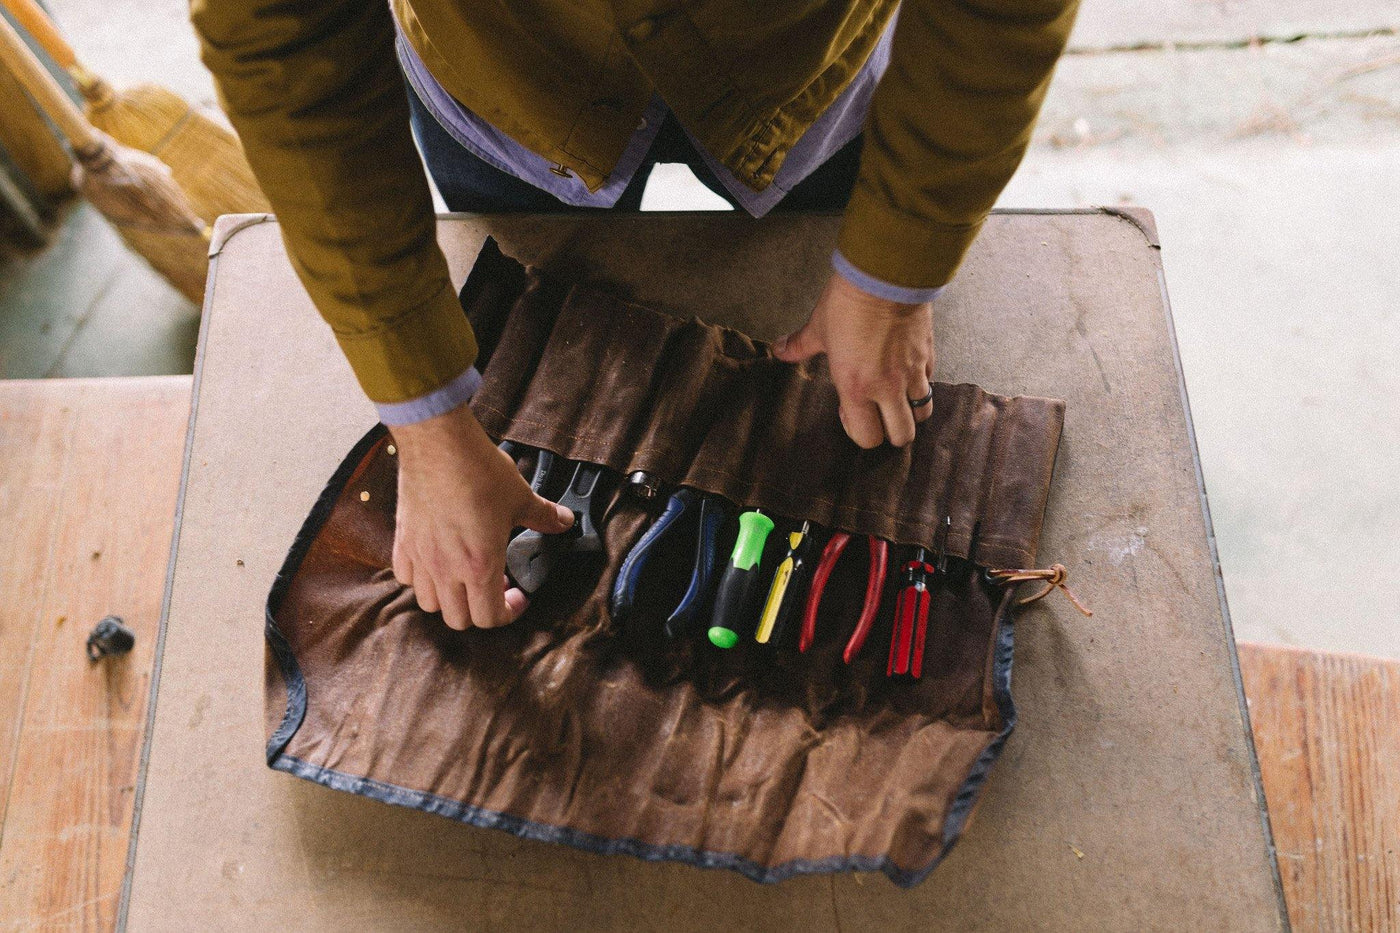 The Orville Waxed Canvas Tool Roll by Sturdy Brothers